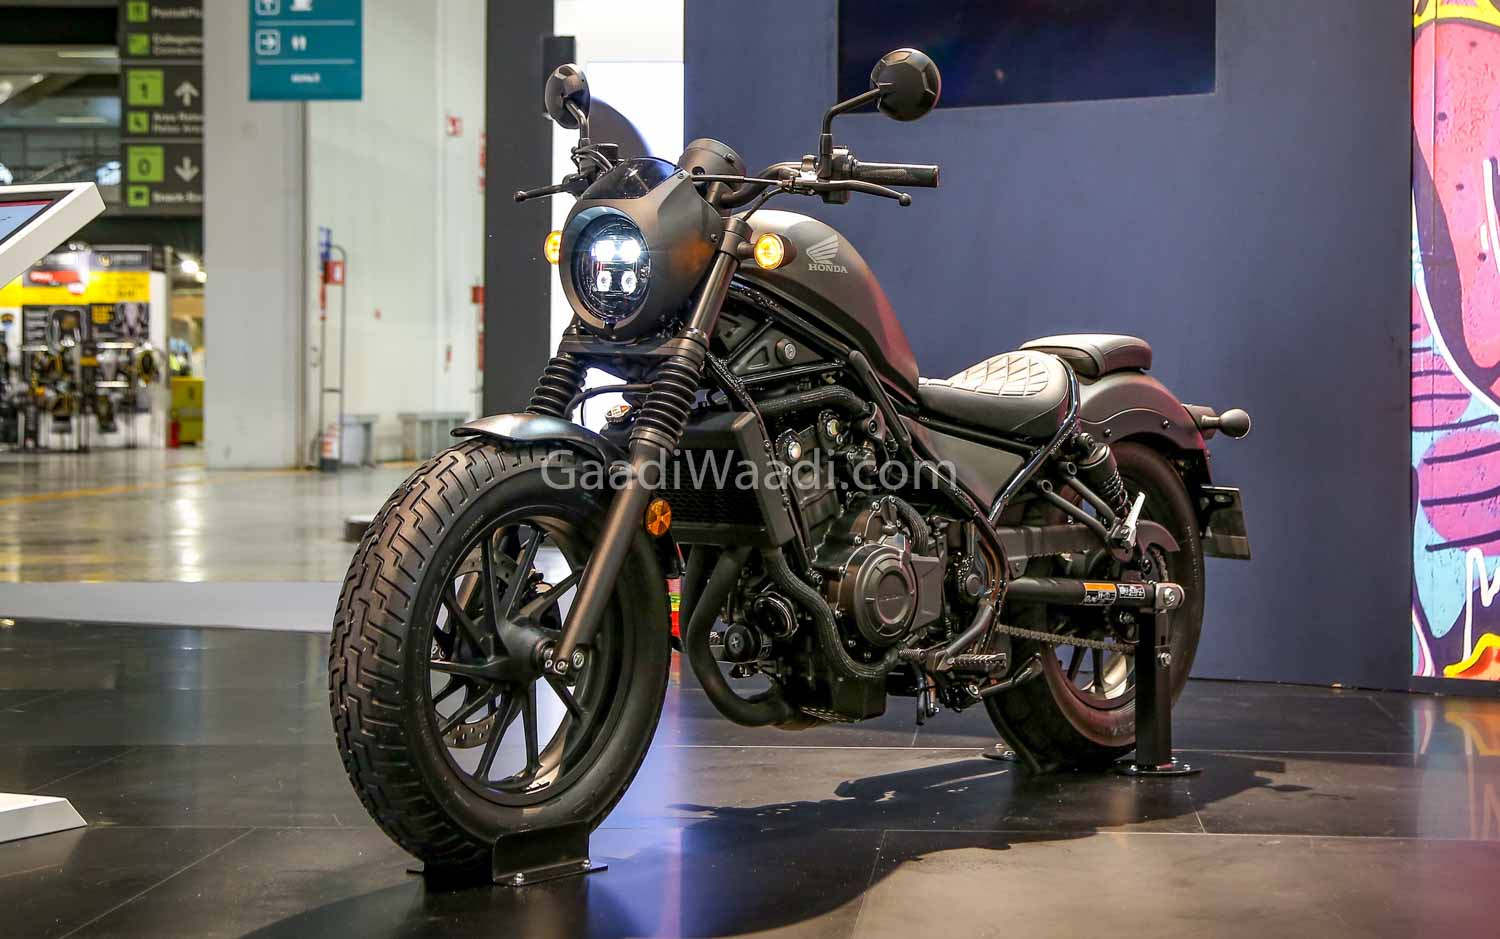 Honda To Introduce 5 New Premium Motorcycles To Indian Lineup